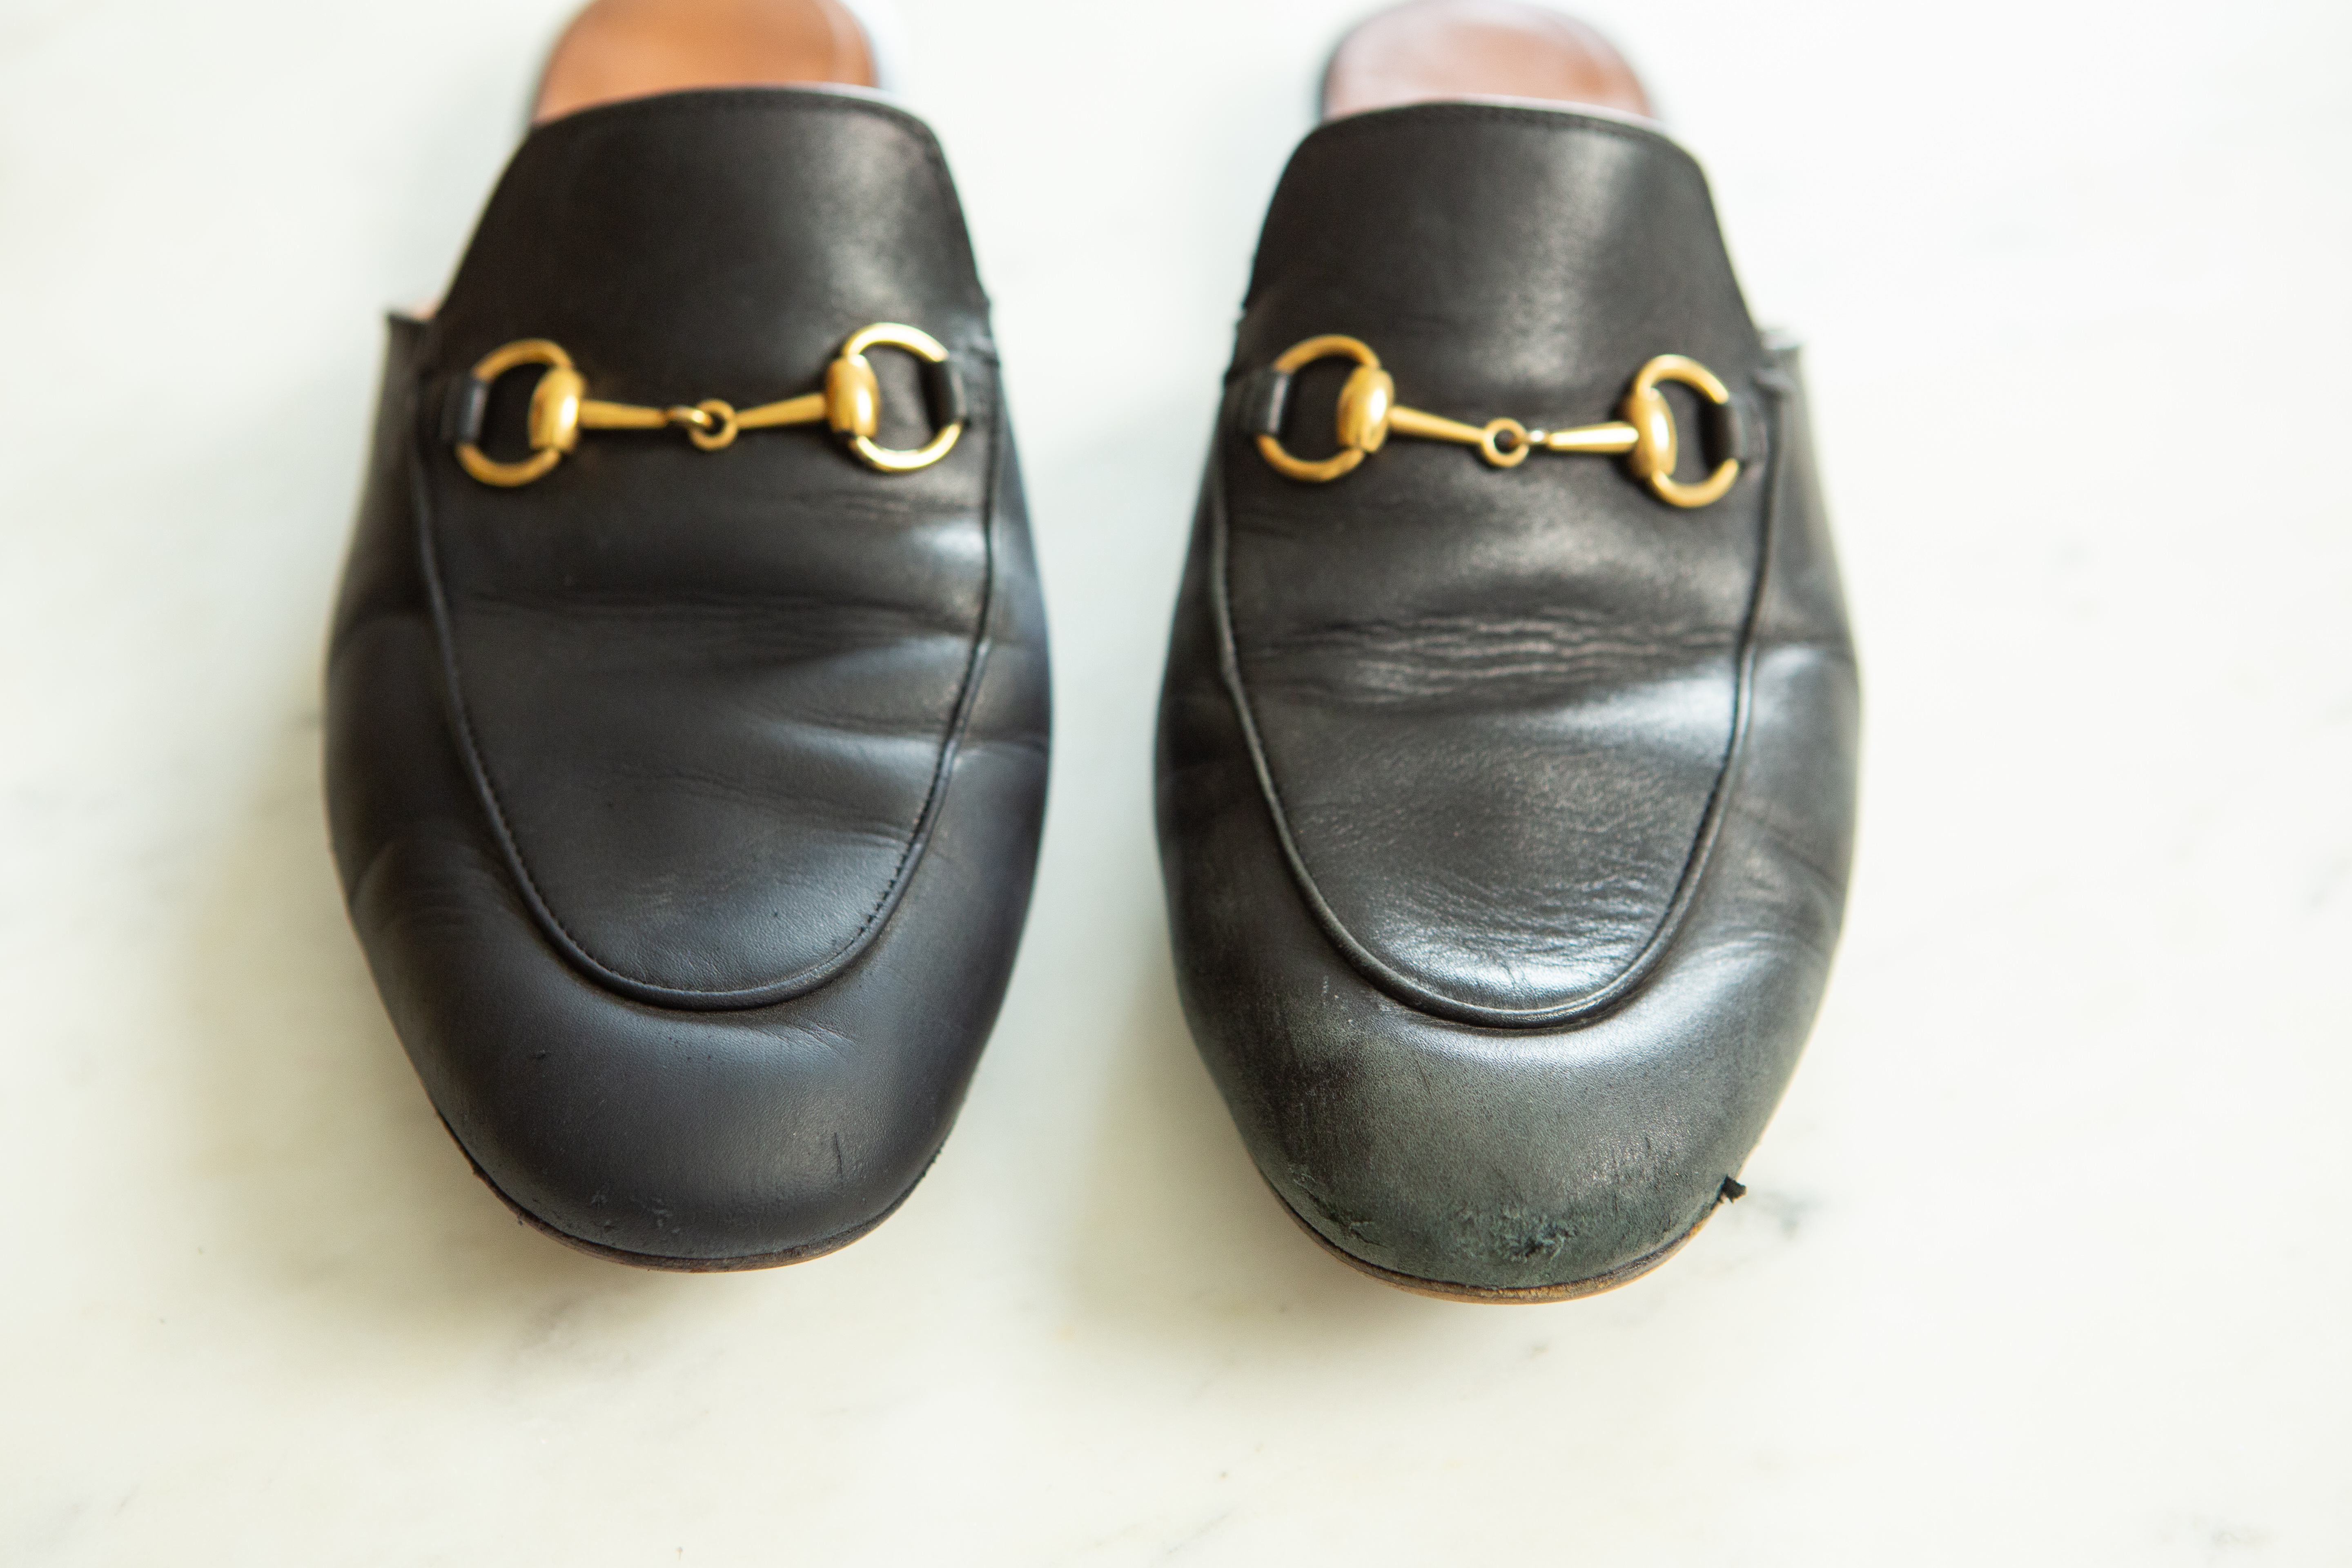 How To Shine Gucci Princetown Loafers 